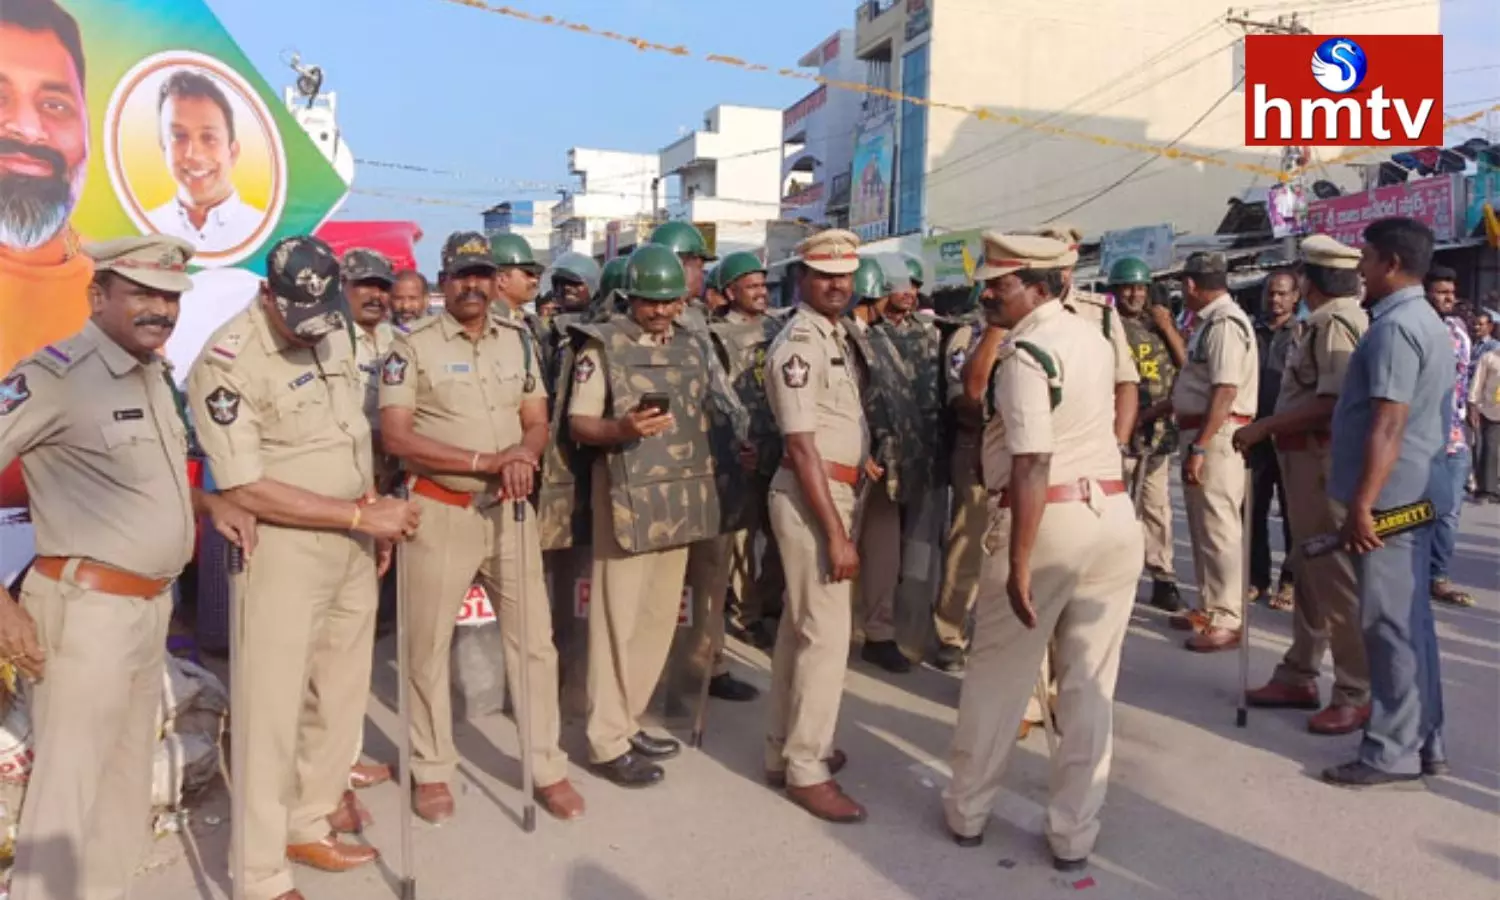 Lokesh Speech Was Stopped By The Police